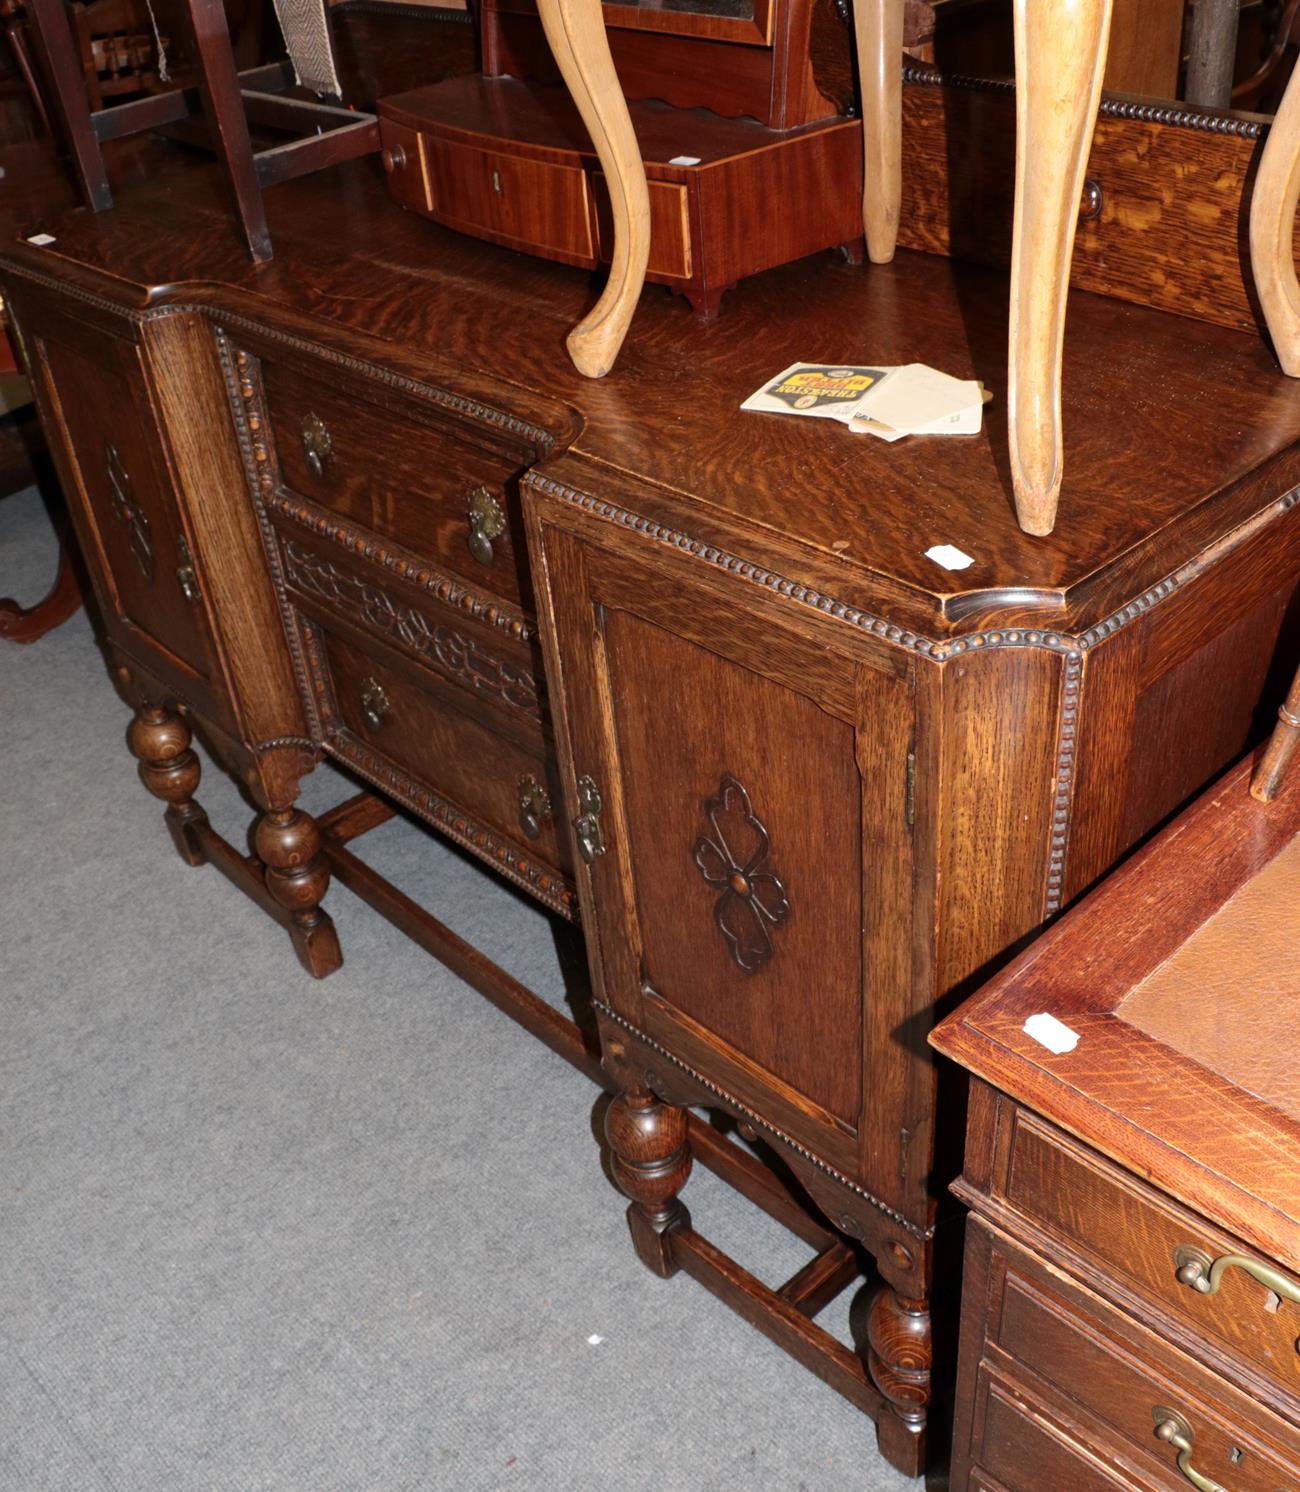 ^ A 1930's carved oak inverted breakfront sideboard, with egg and dart decoration, turned legs and